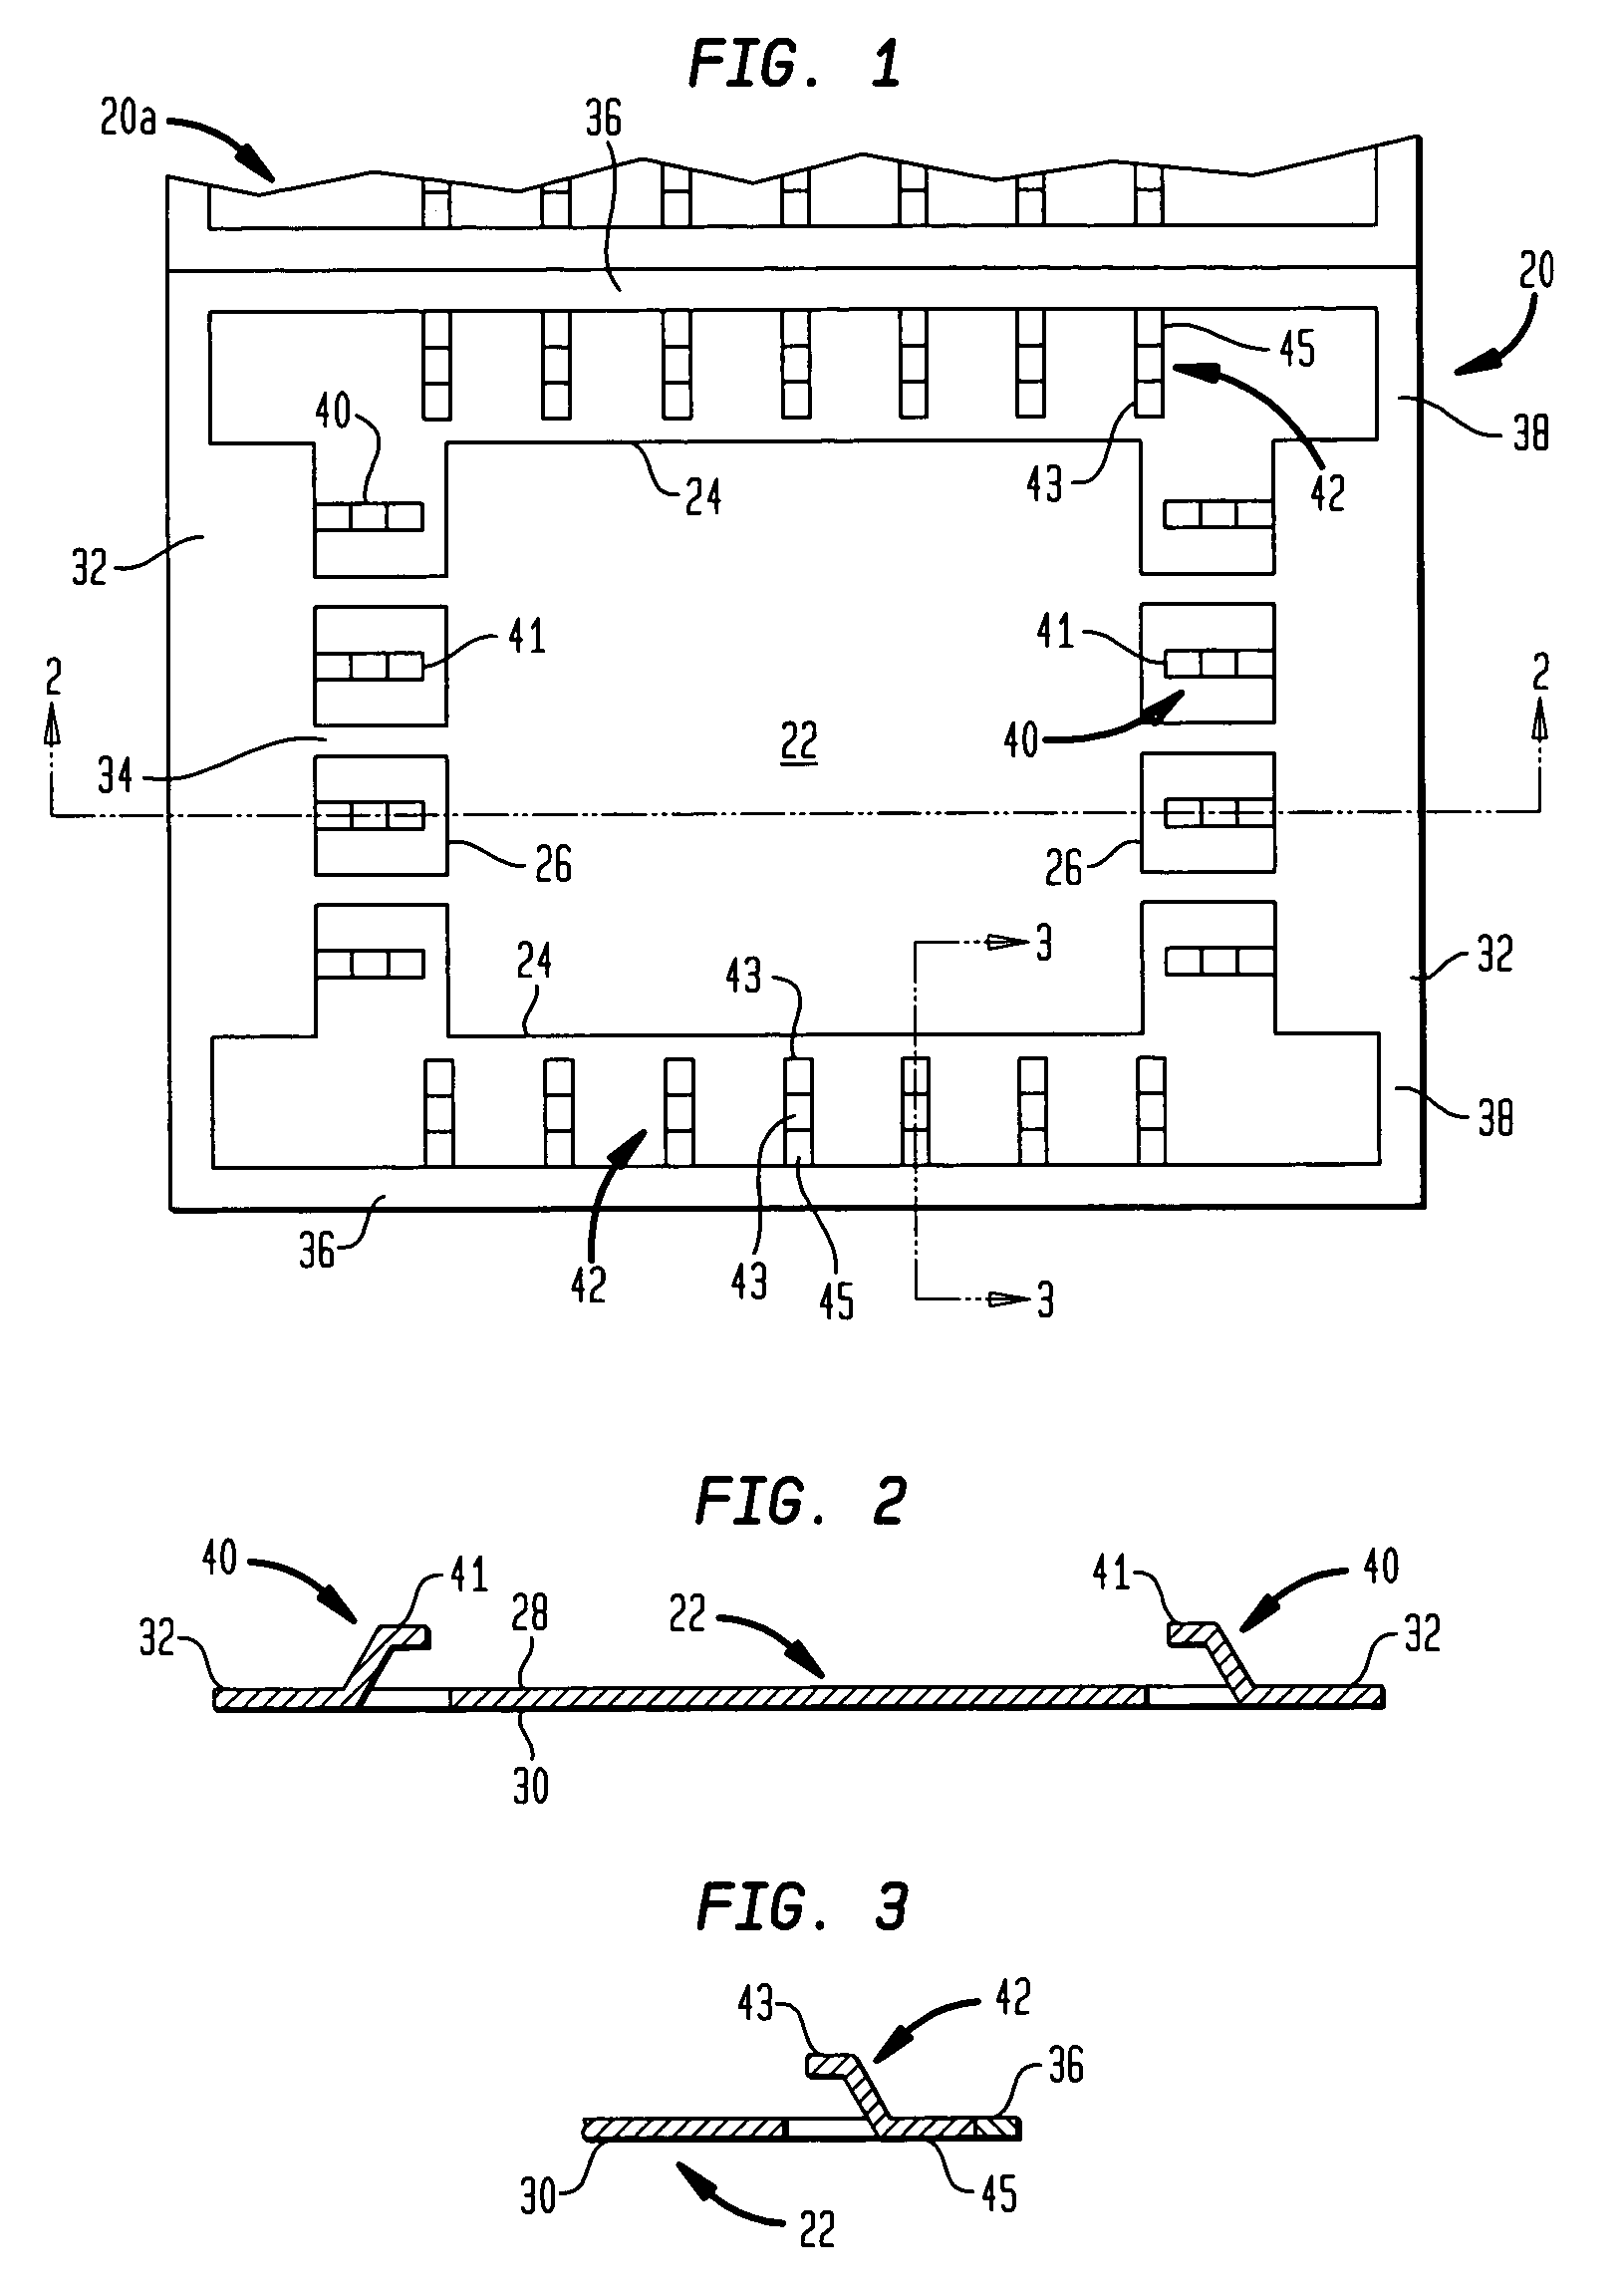 High frequency chip packages with connecting elements